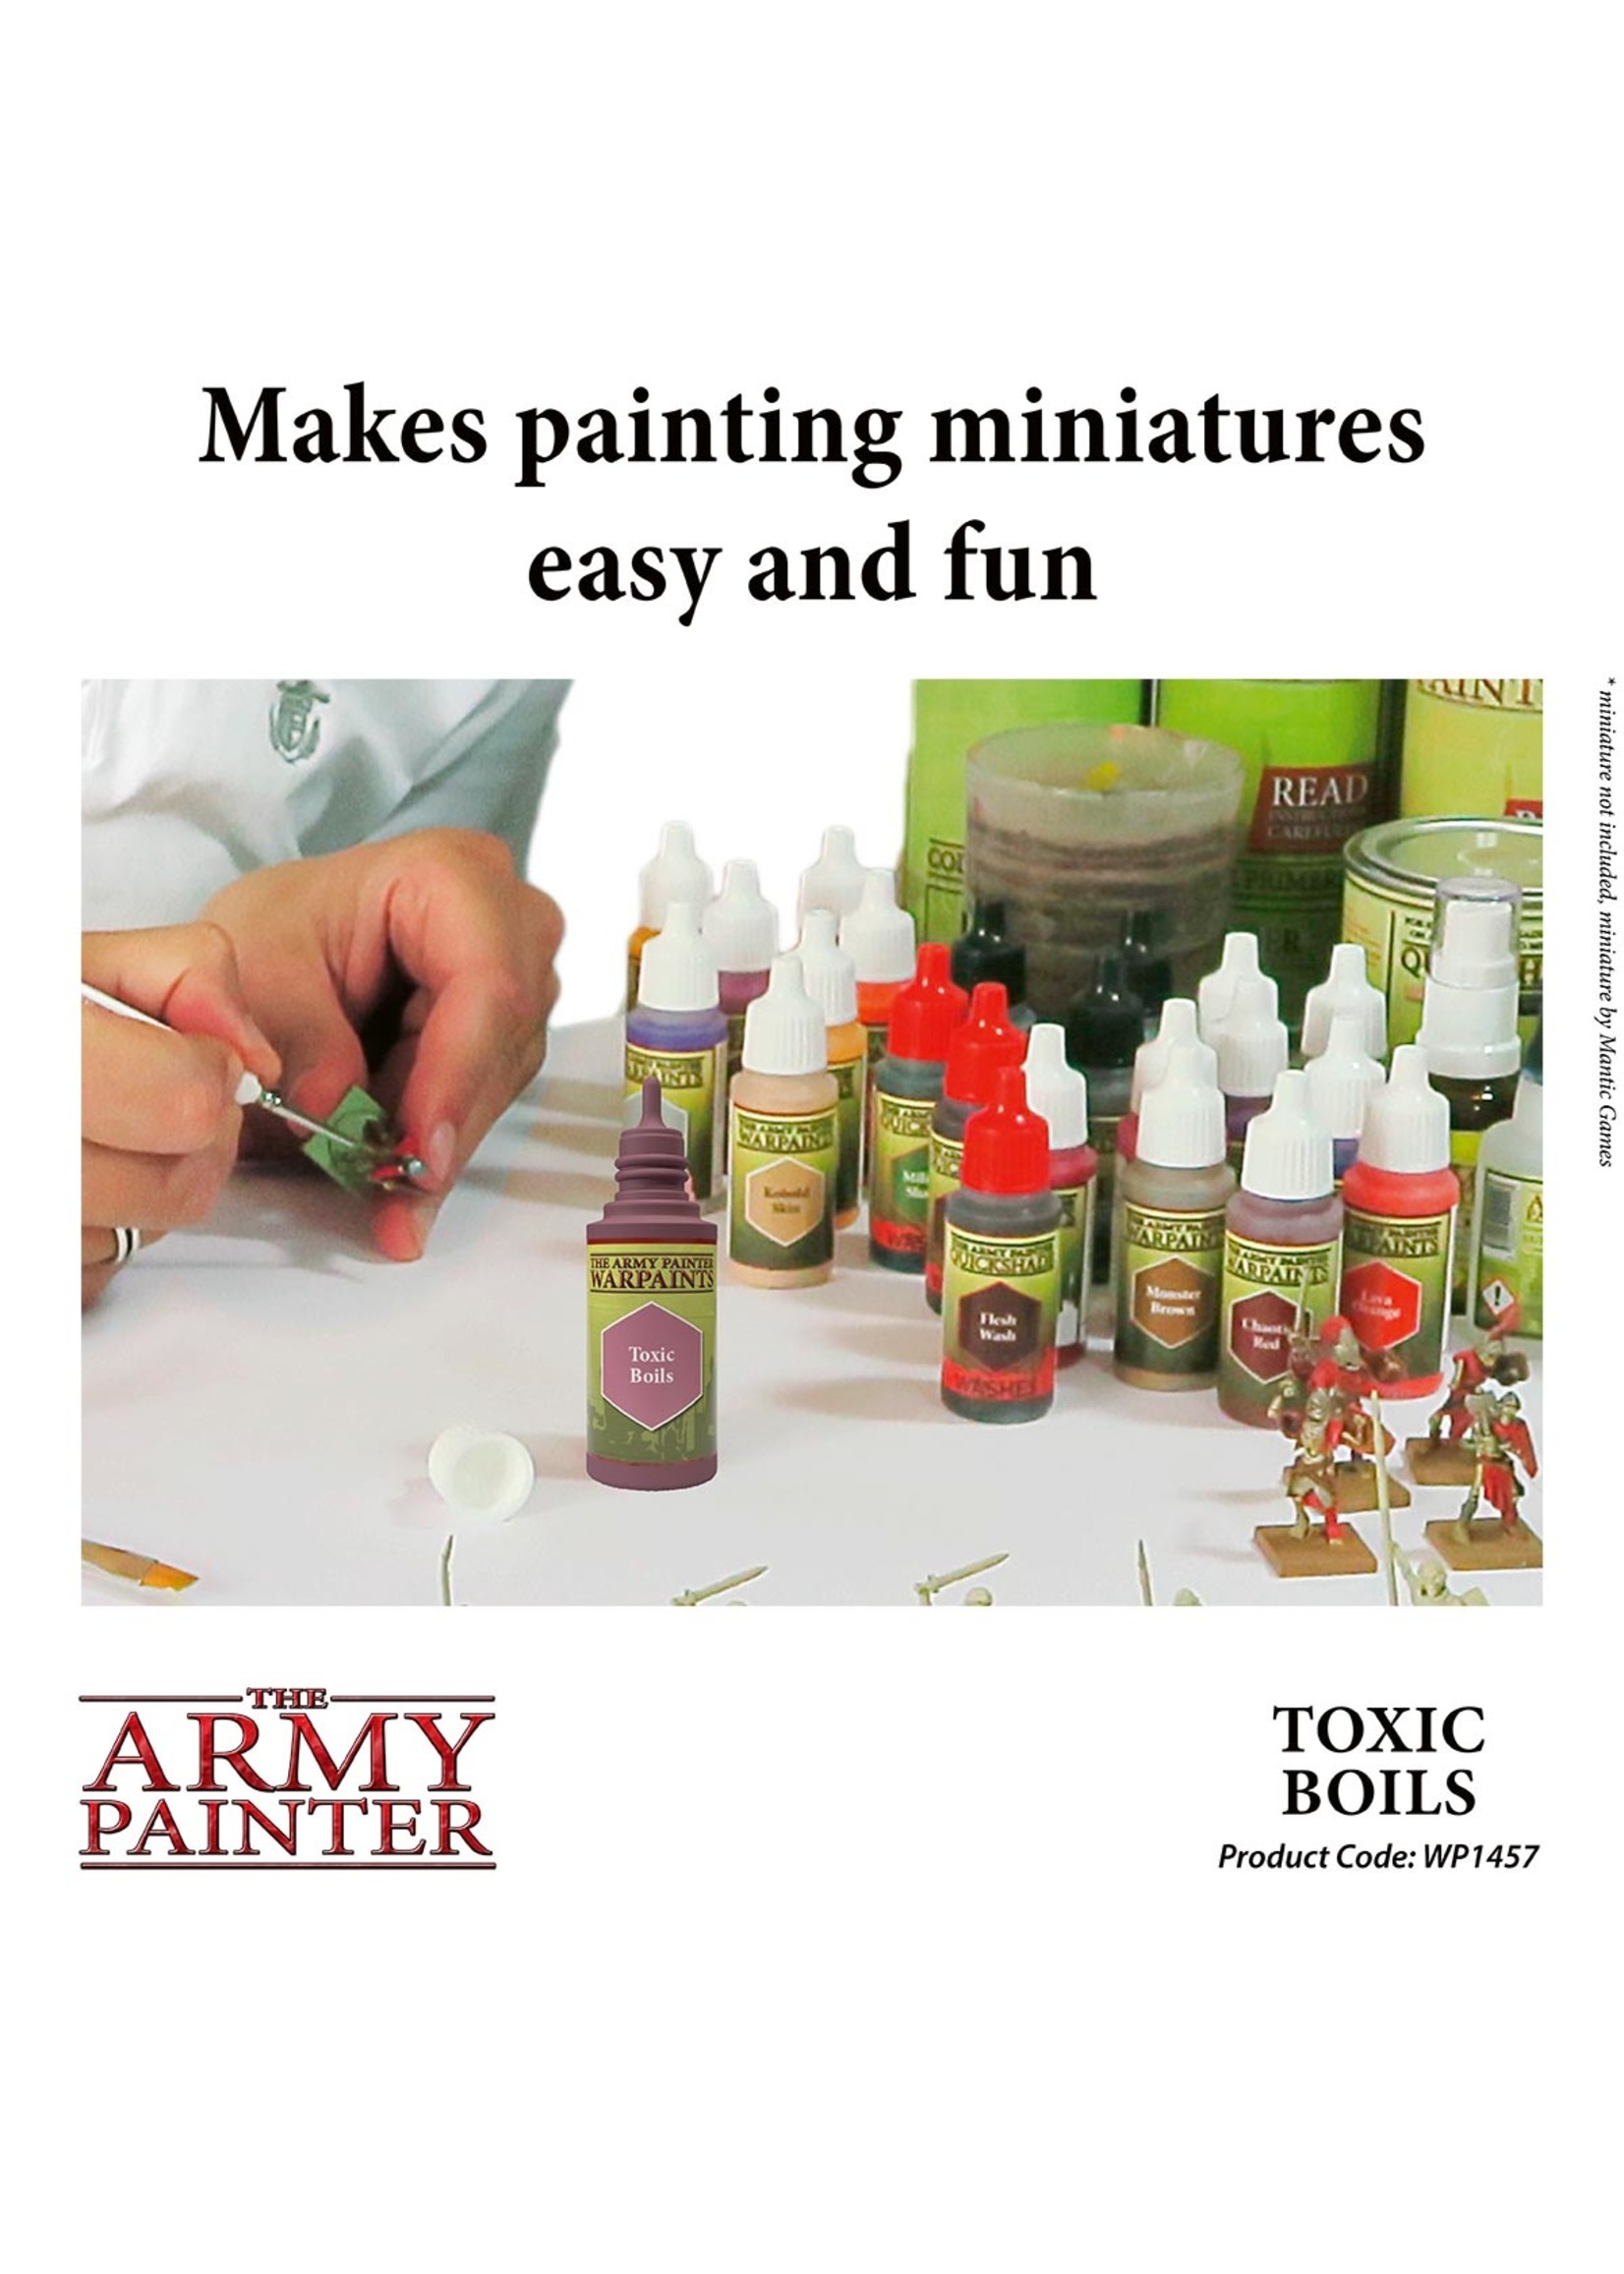 The Army Painter WP1457 - Toxic Boils 18ml Acrylic Paint